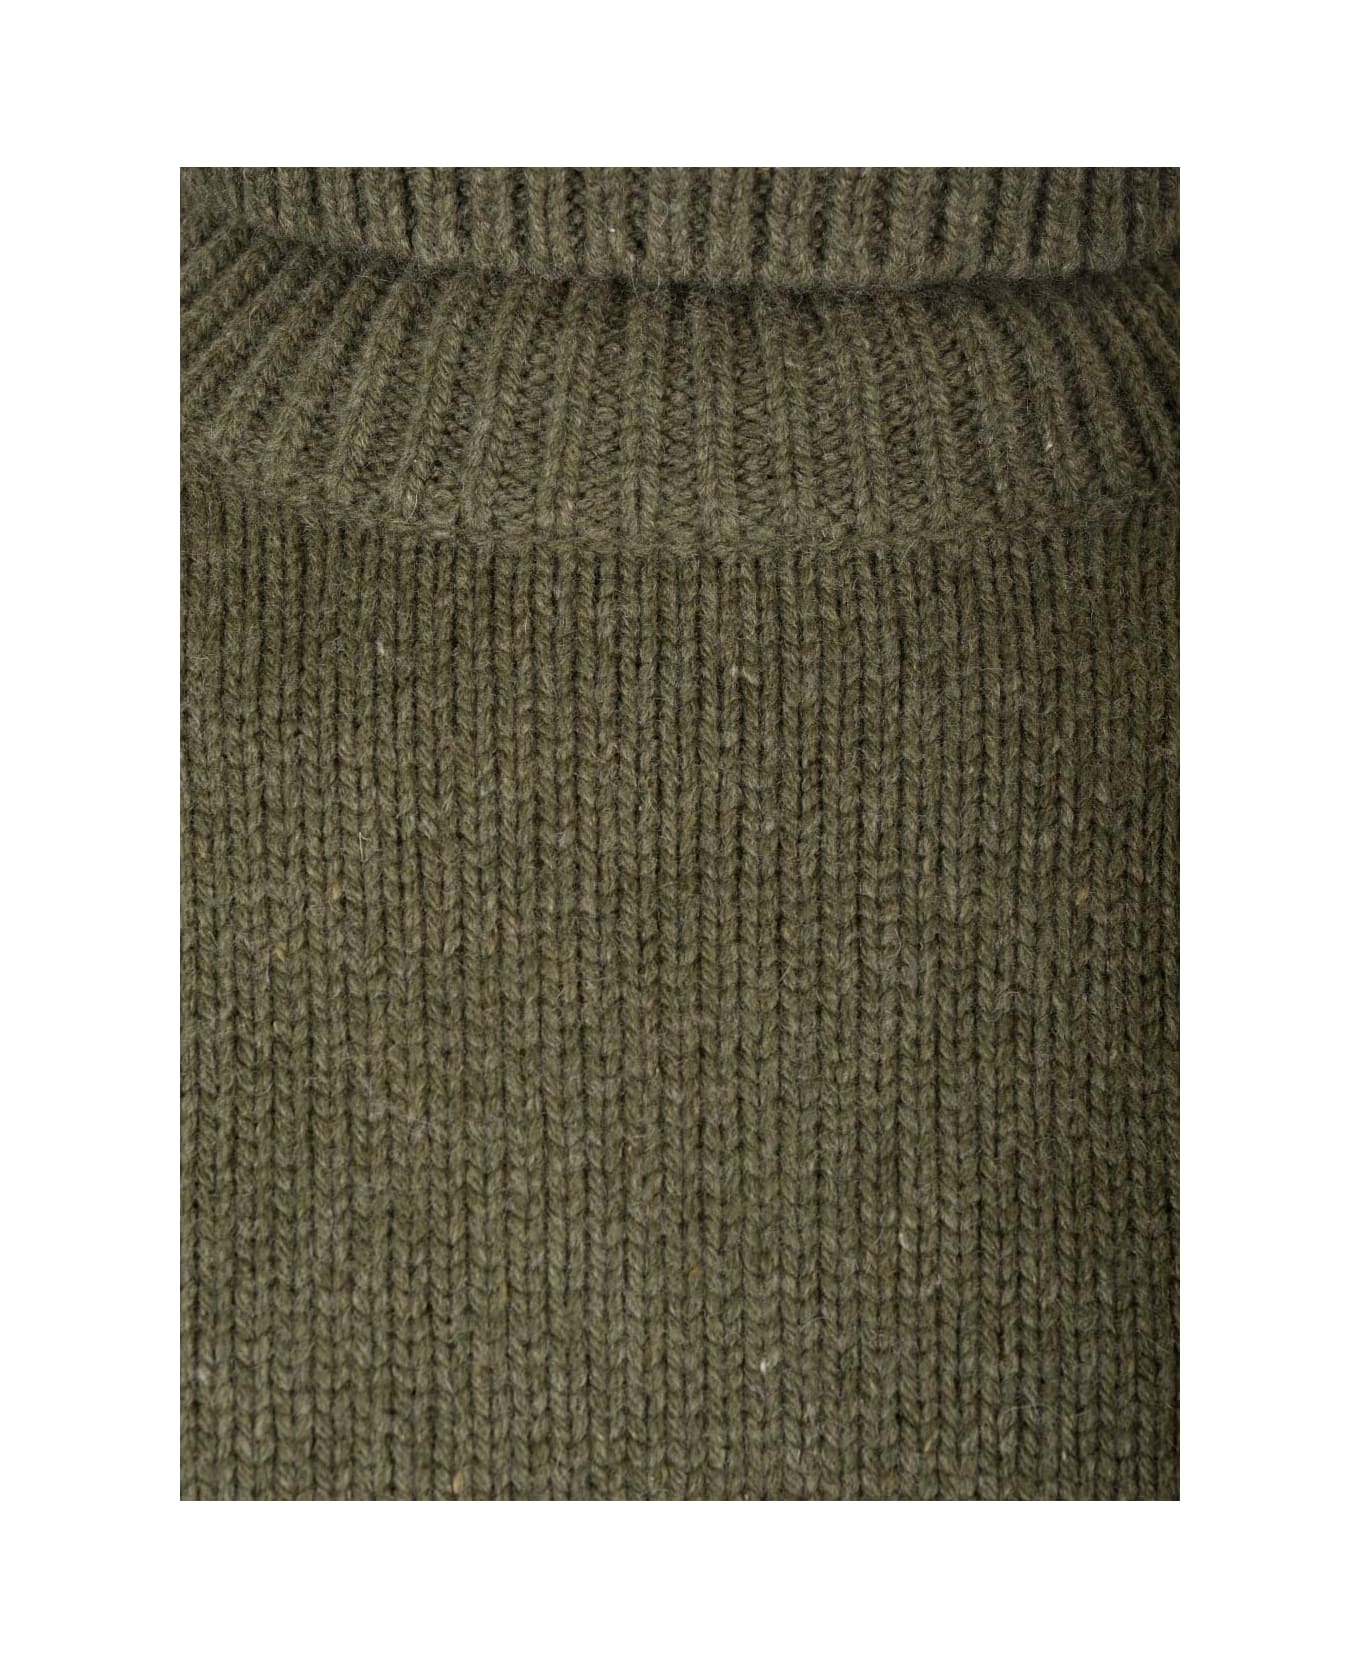 Givenchy Cachemire Turtleneck - Green